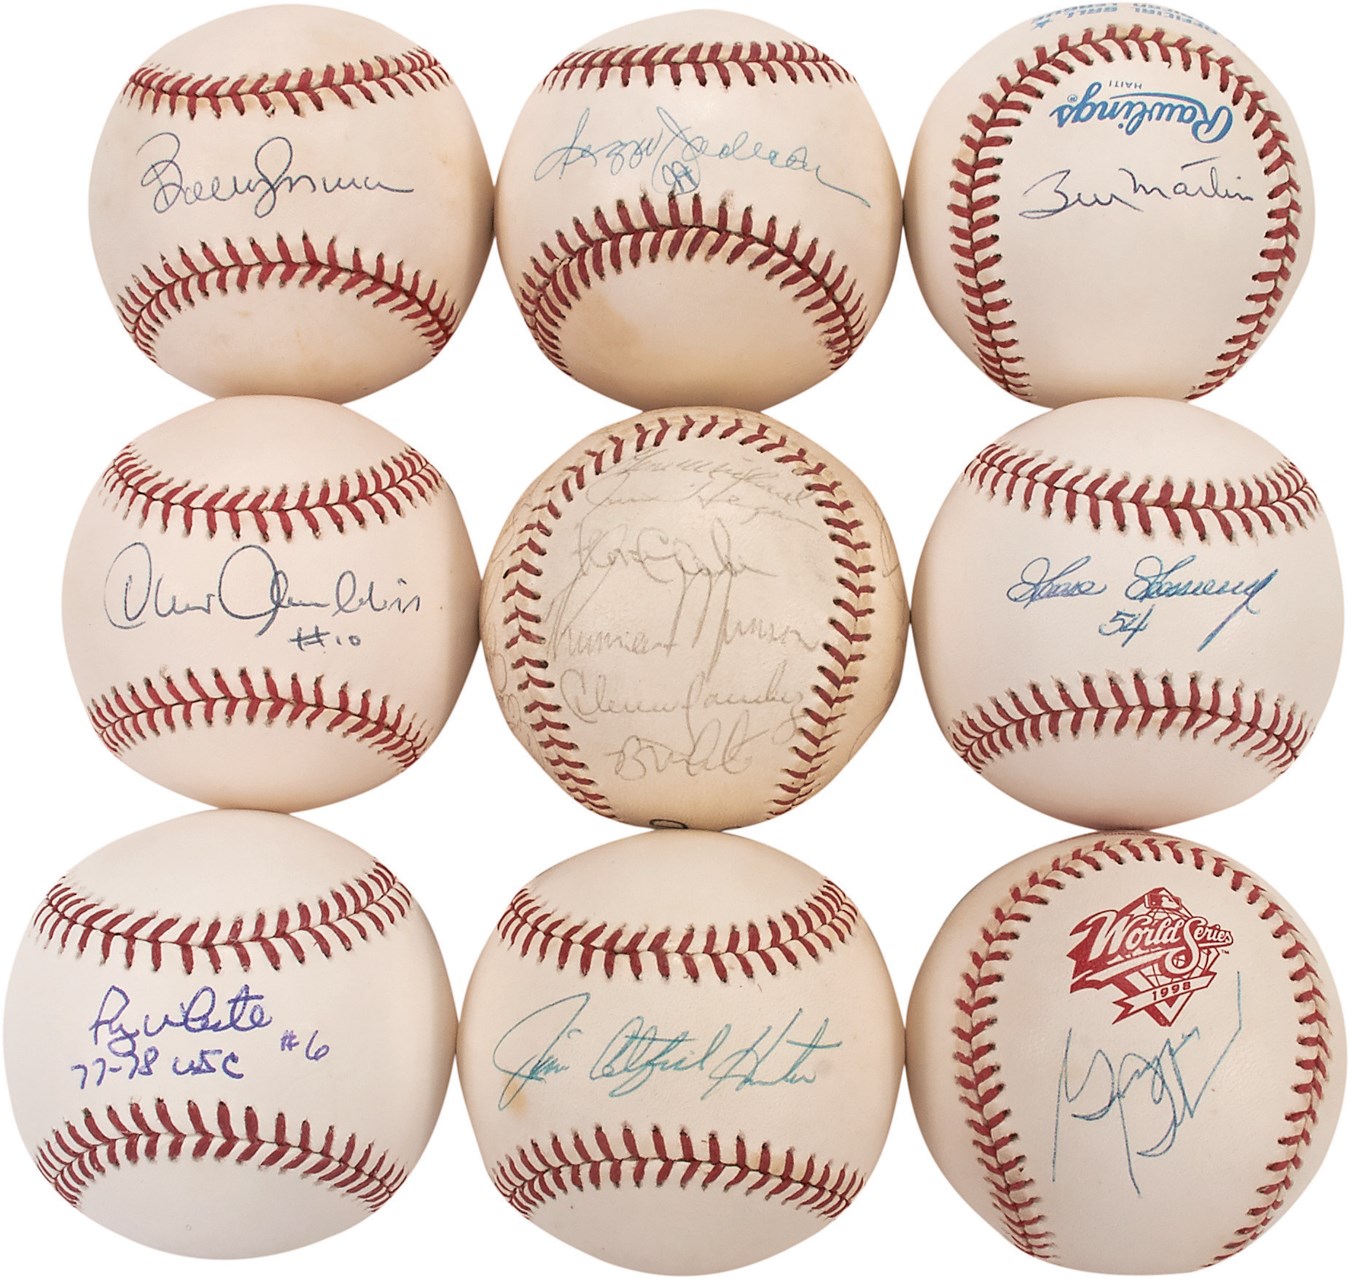 NY Yankees, Giants & Mets - 1970s Yankees Single-Signed Baseball Collection - with 1973 Yankee Team Ball Inc. Munson (50+)